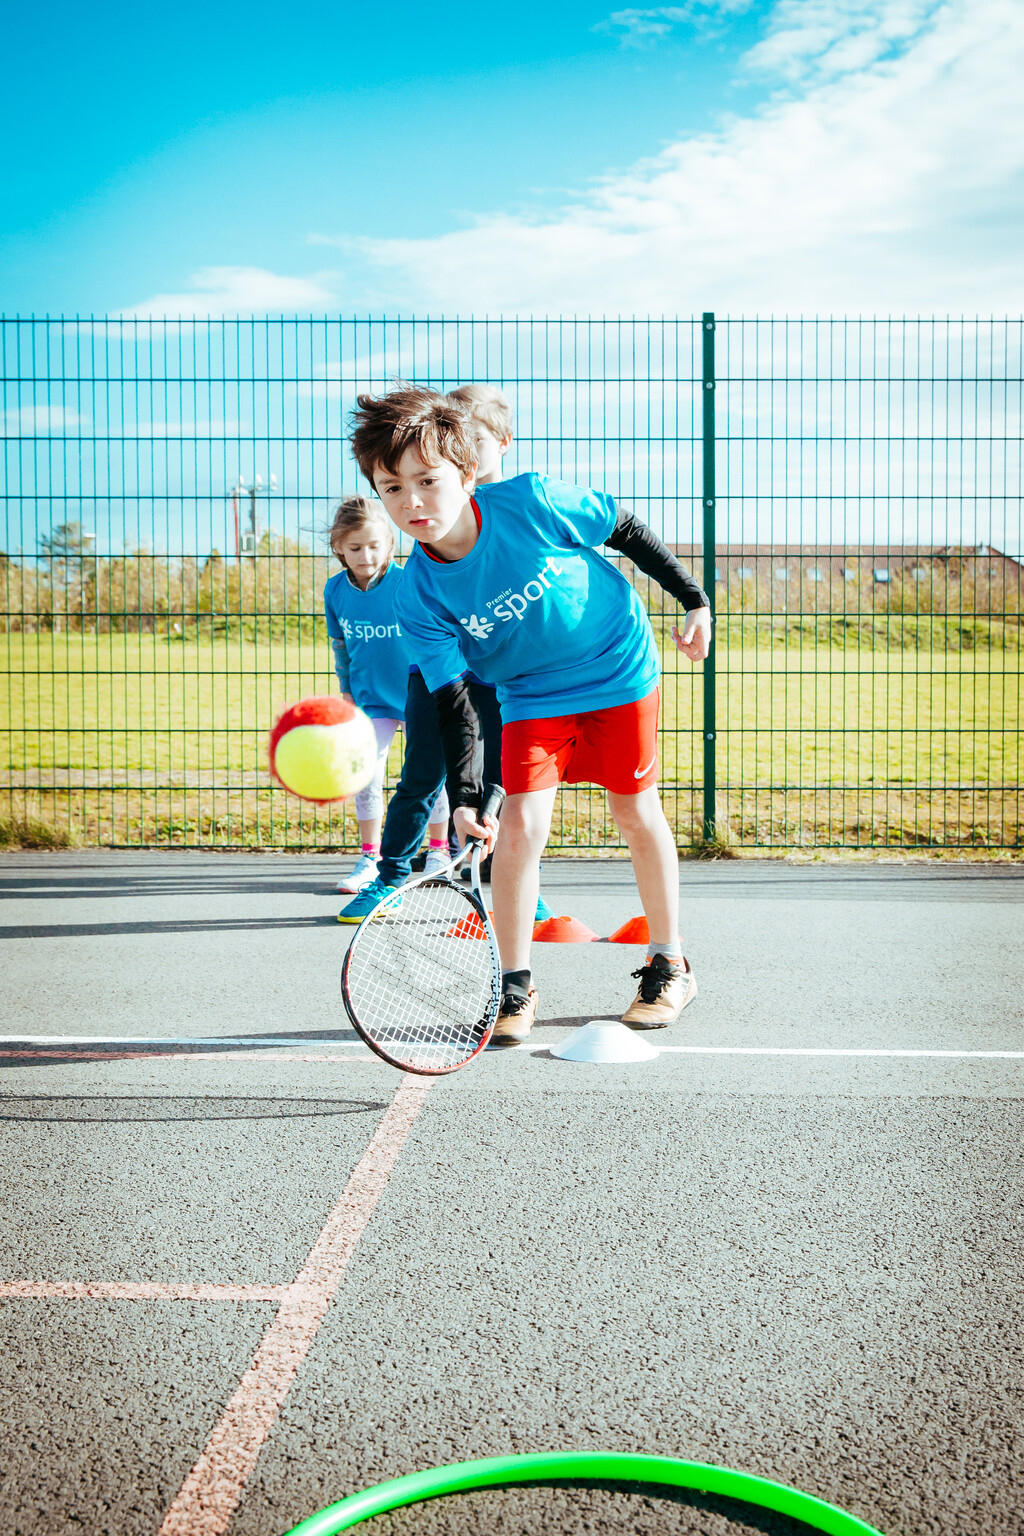 Sports like tennis can promote greater focus and coordination.